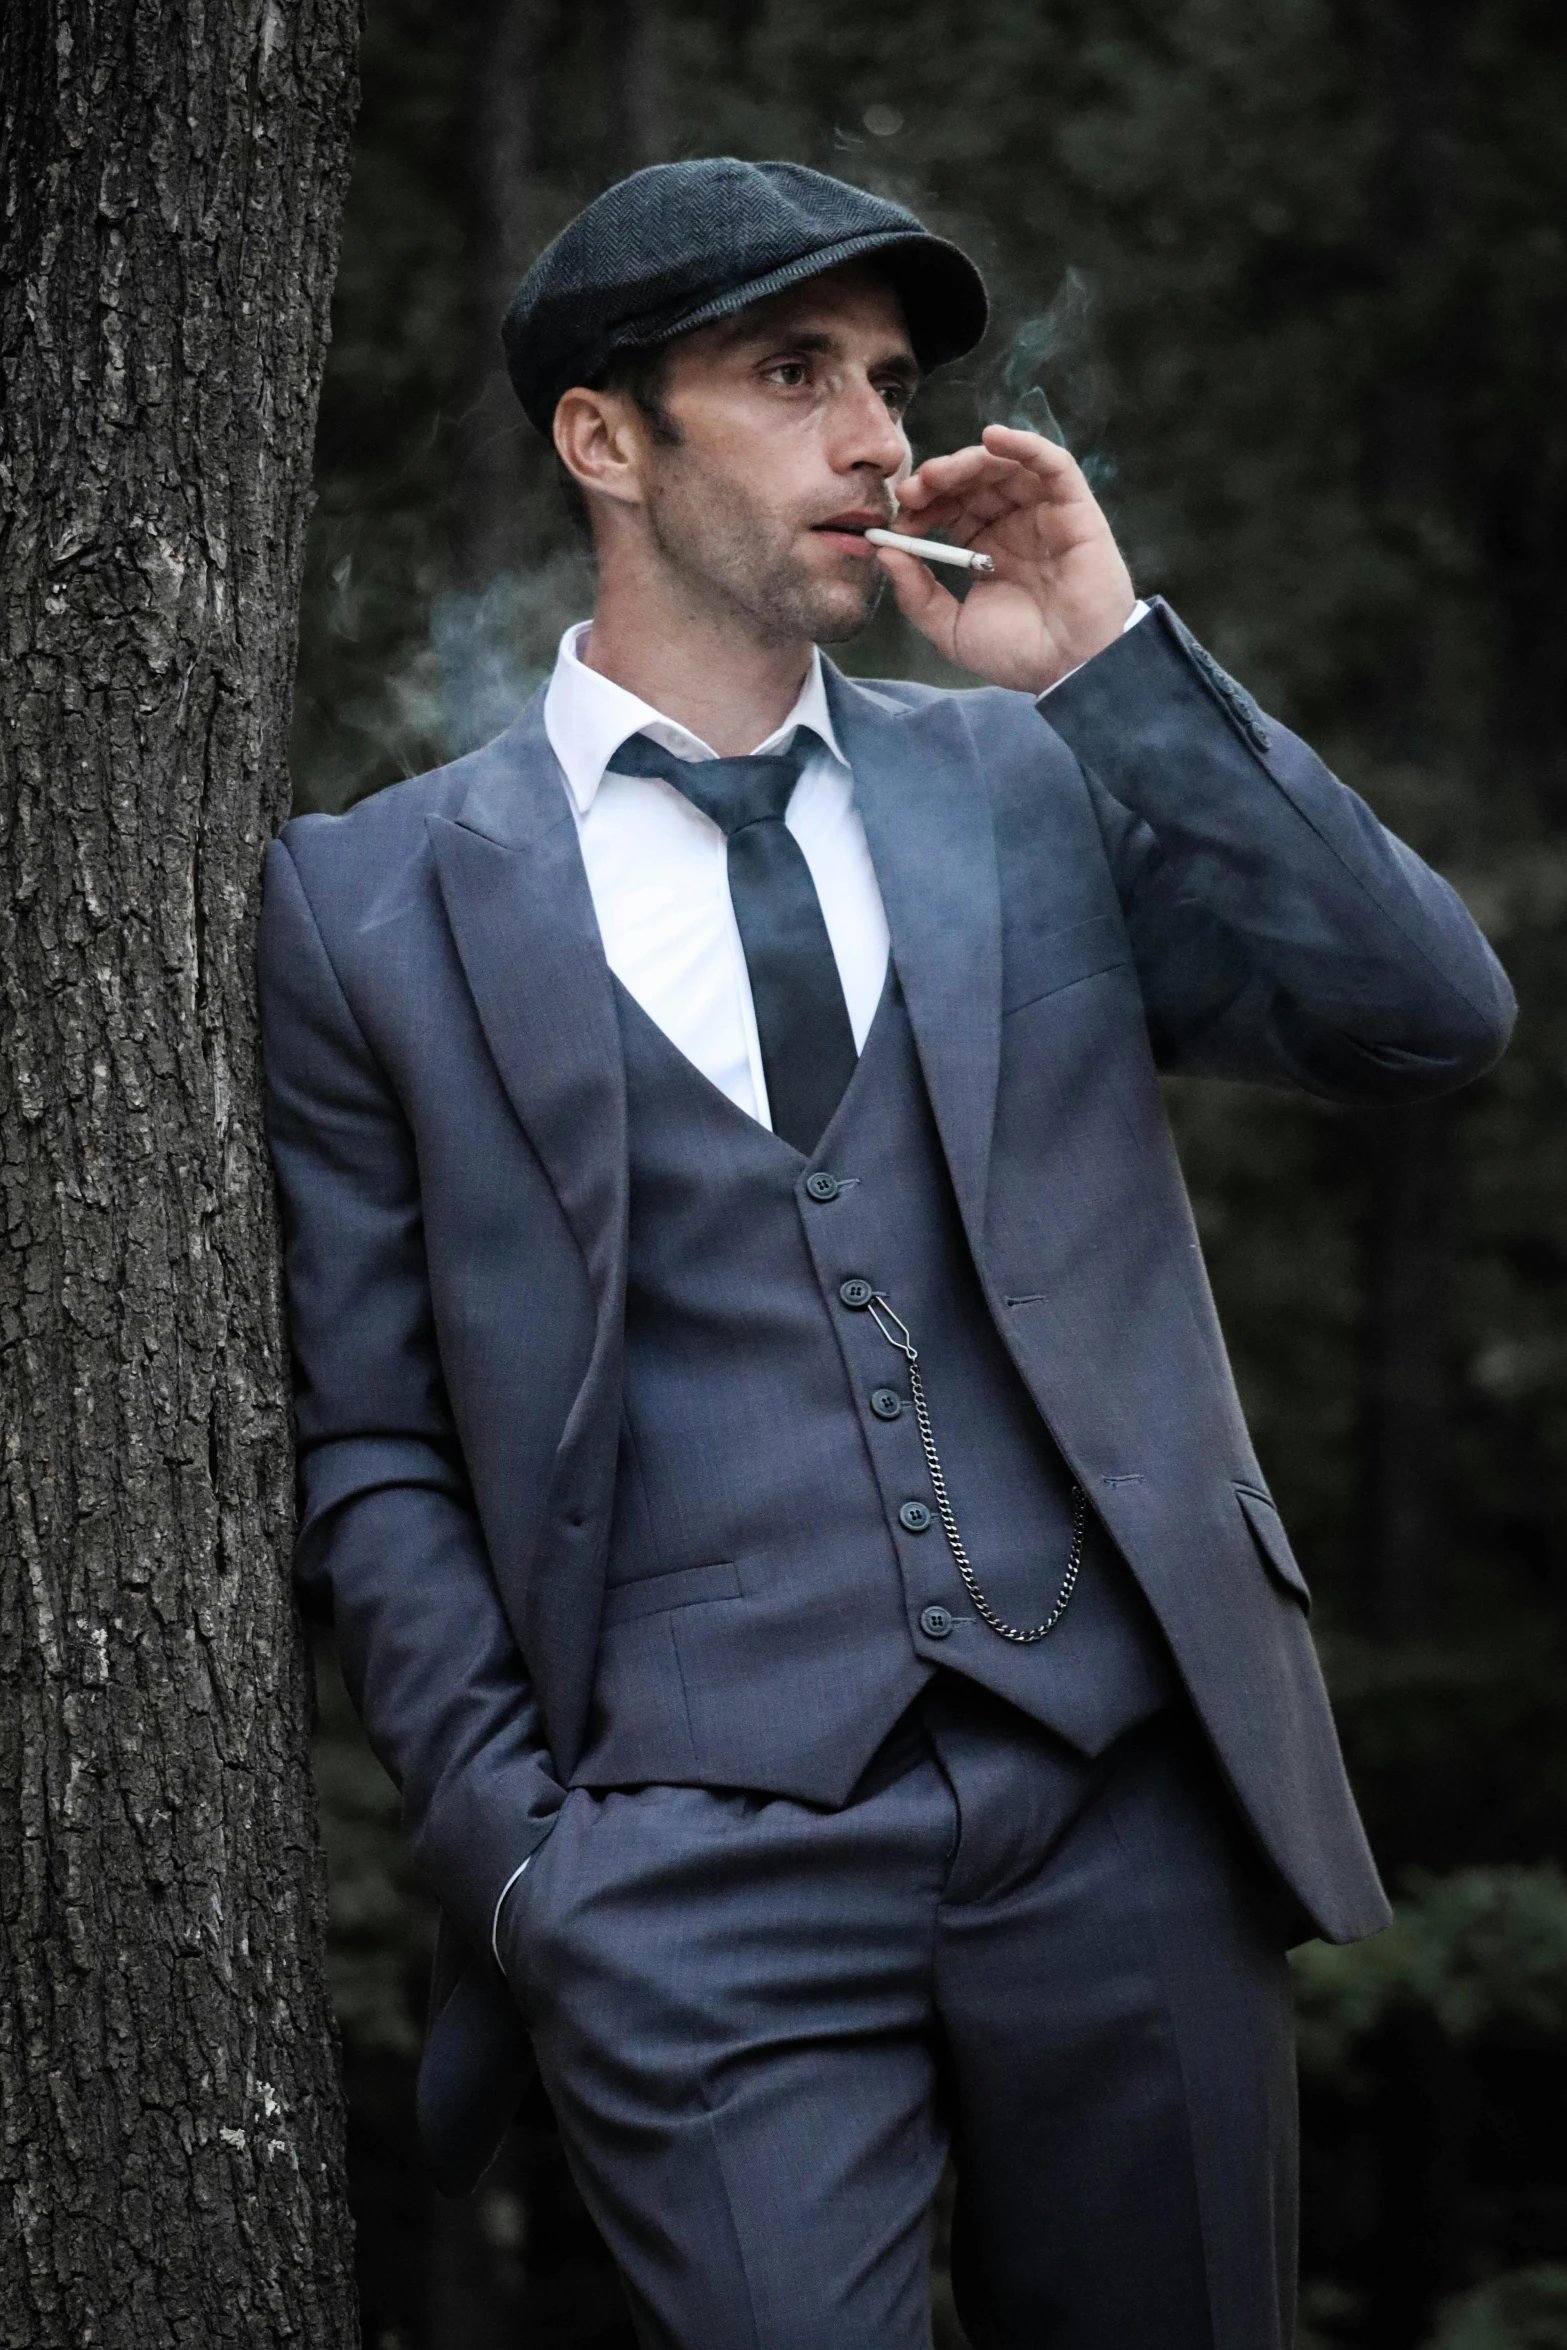 a man dressed in a gray suit smoking cigarette